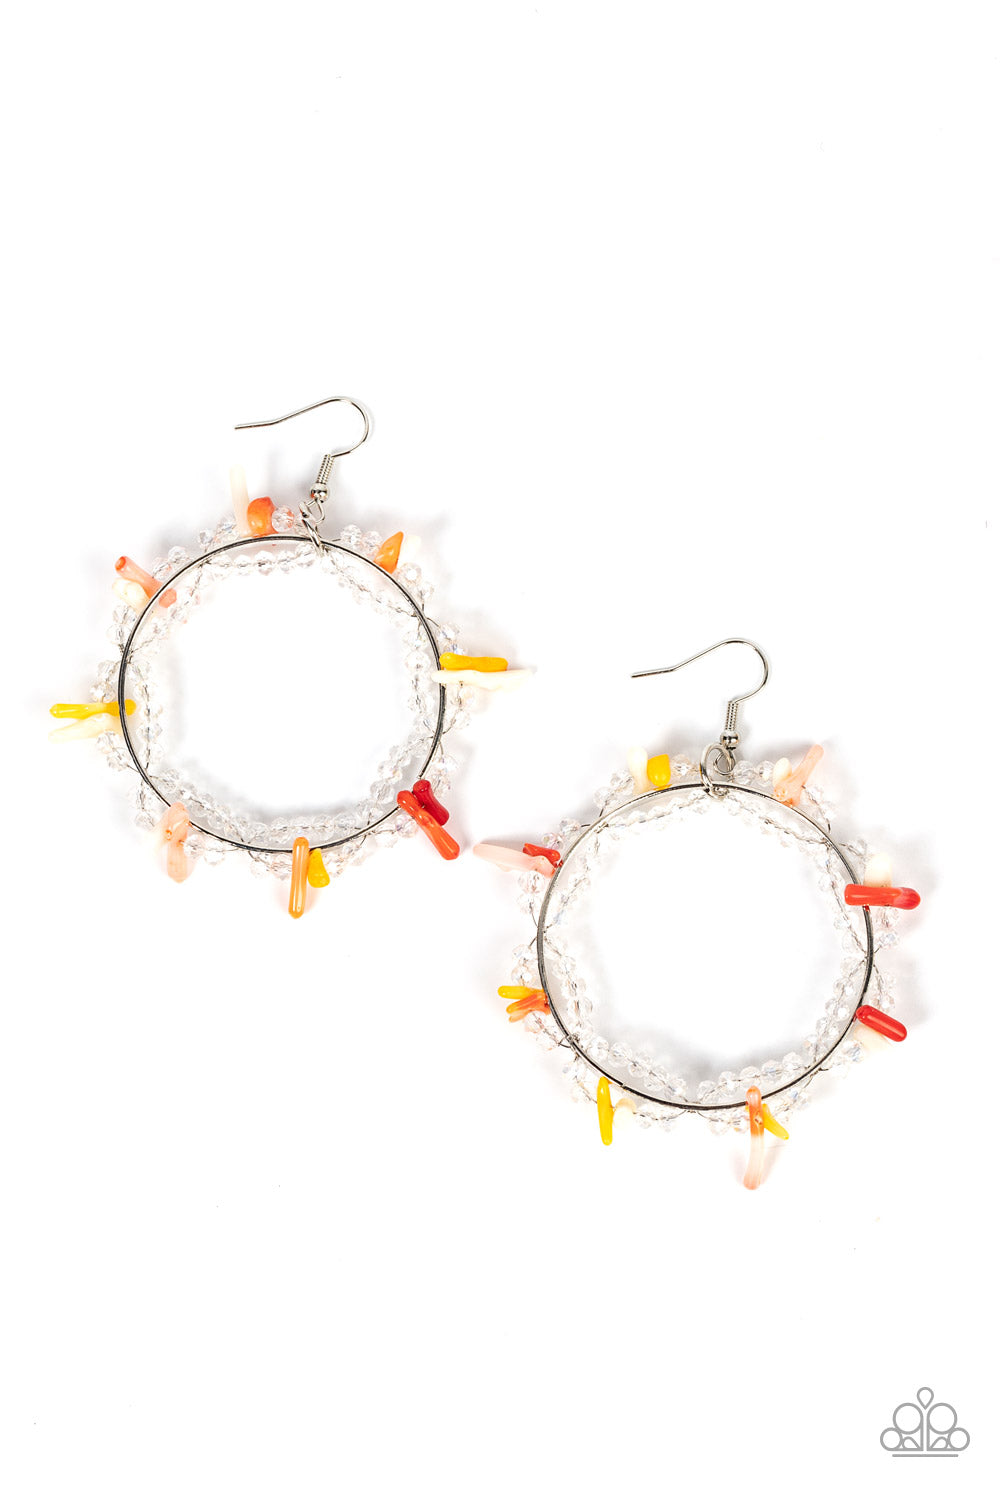 Paparazzi Accessories Ocean Surf - Multi Dainty crystal-like beads and multicolored shell-like pieces are threaded along dainty wires, creating glitzy loops around an oversized silver ring for a beach inspired fashion. Earring attaches to a standard fishh